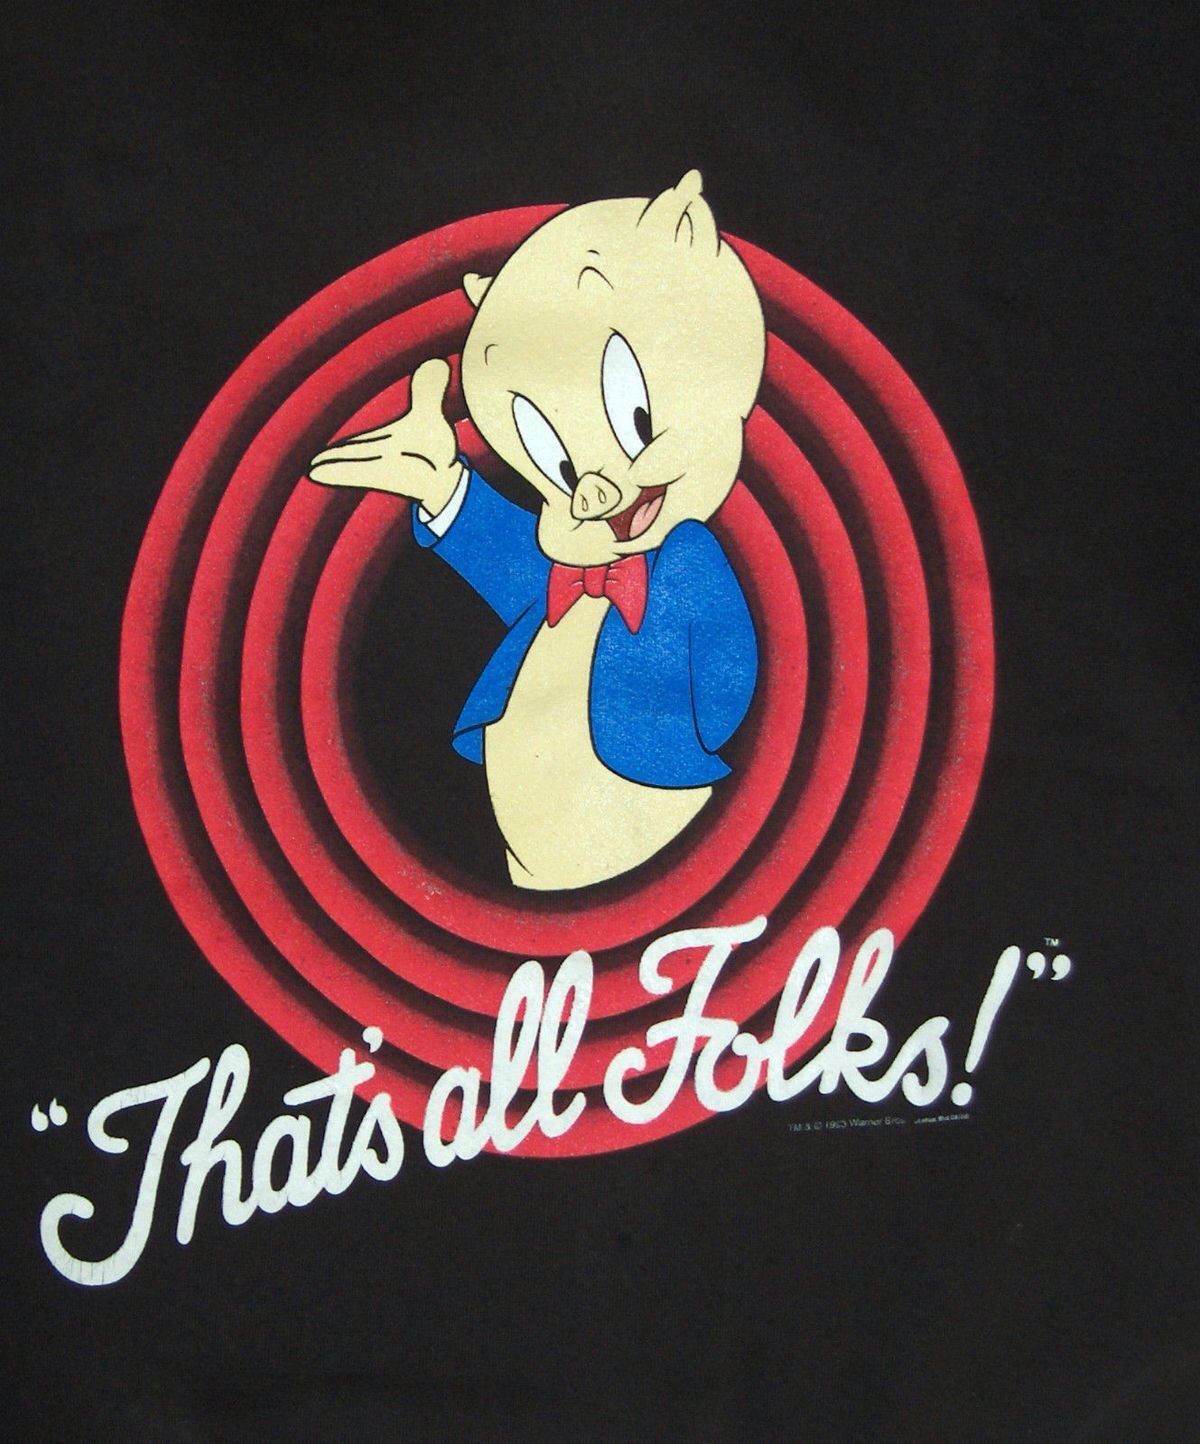 That's All Folks! Pig. Favorite cartoon character, Thats